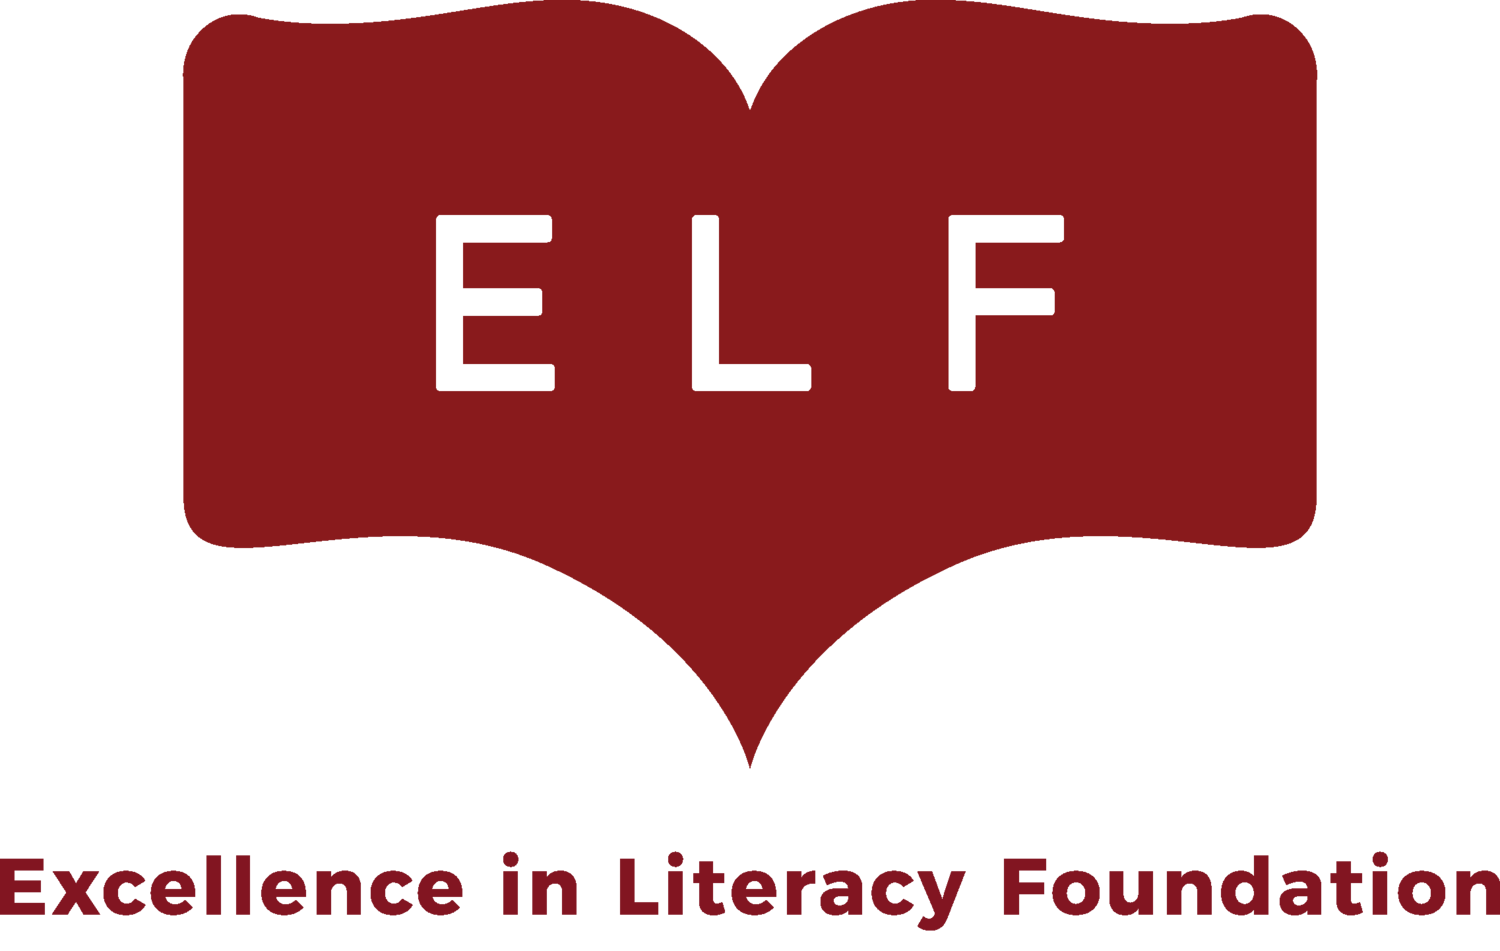 The Excellence in Literacy Foundation (the ELF)